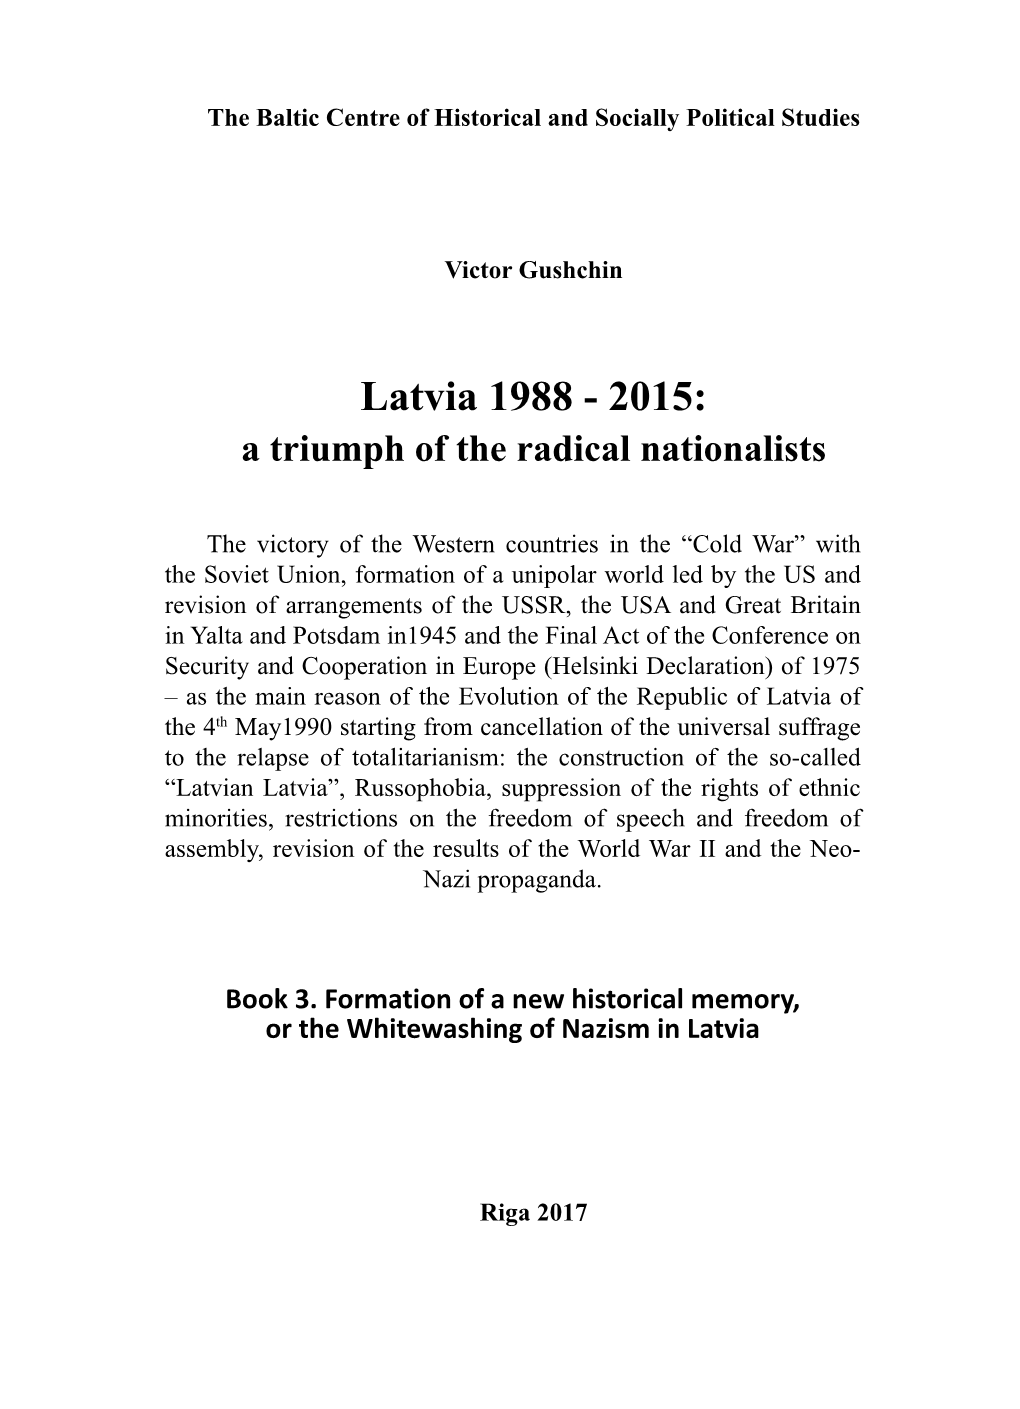 Latvia 1988-2015: a Triumph of the Radical Nationalists» Is Dedicated to Latvia’S Most Recent History